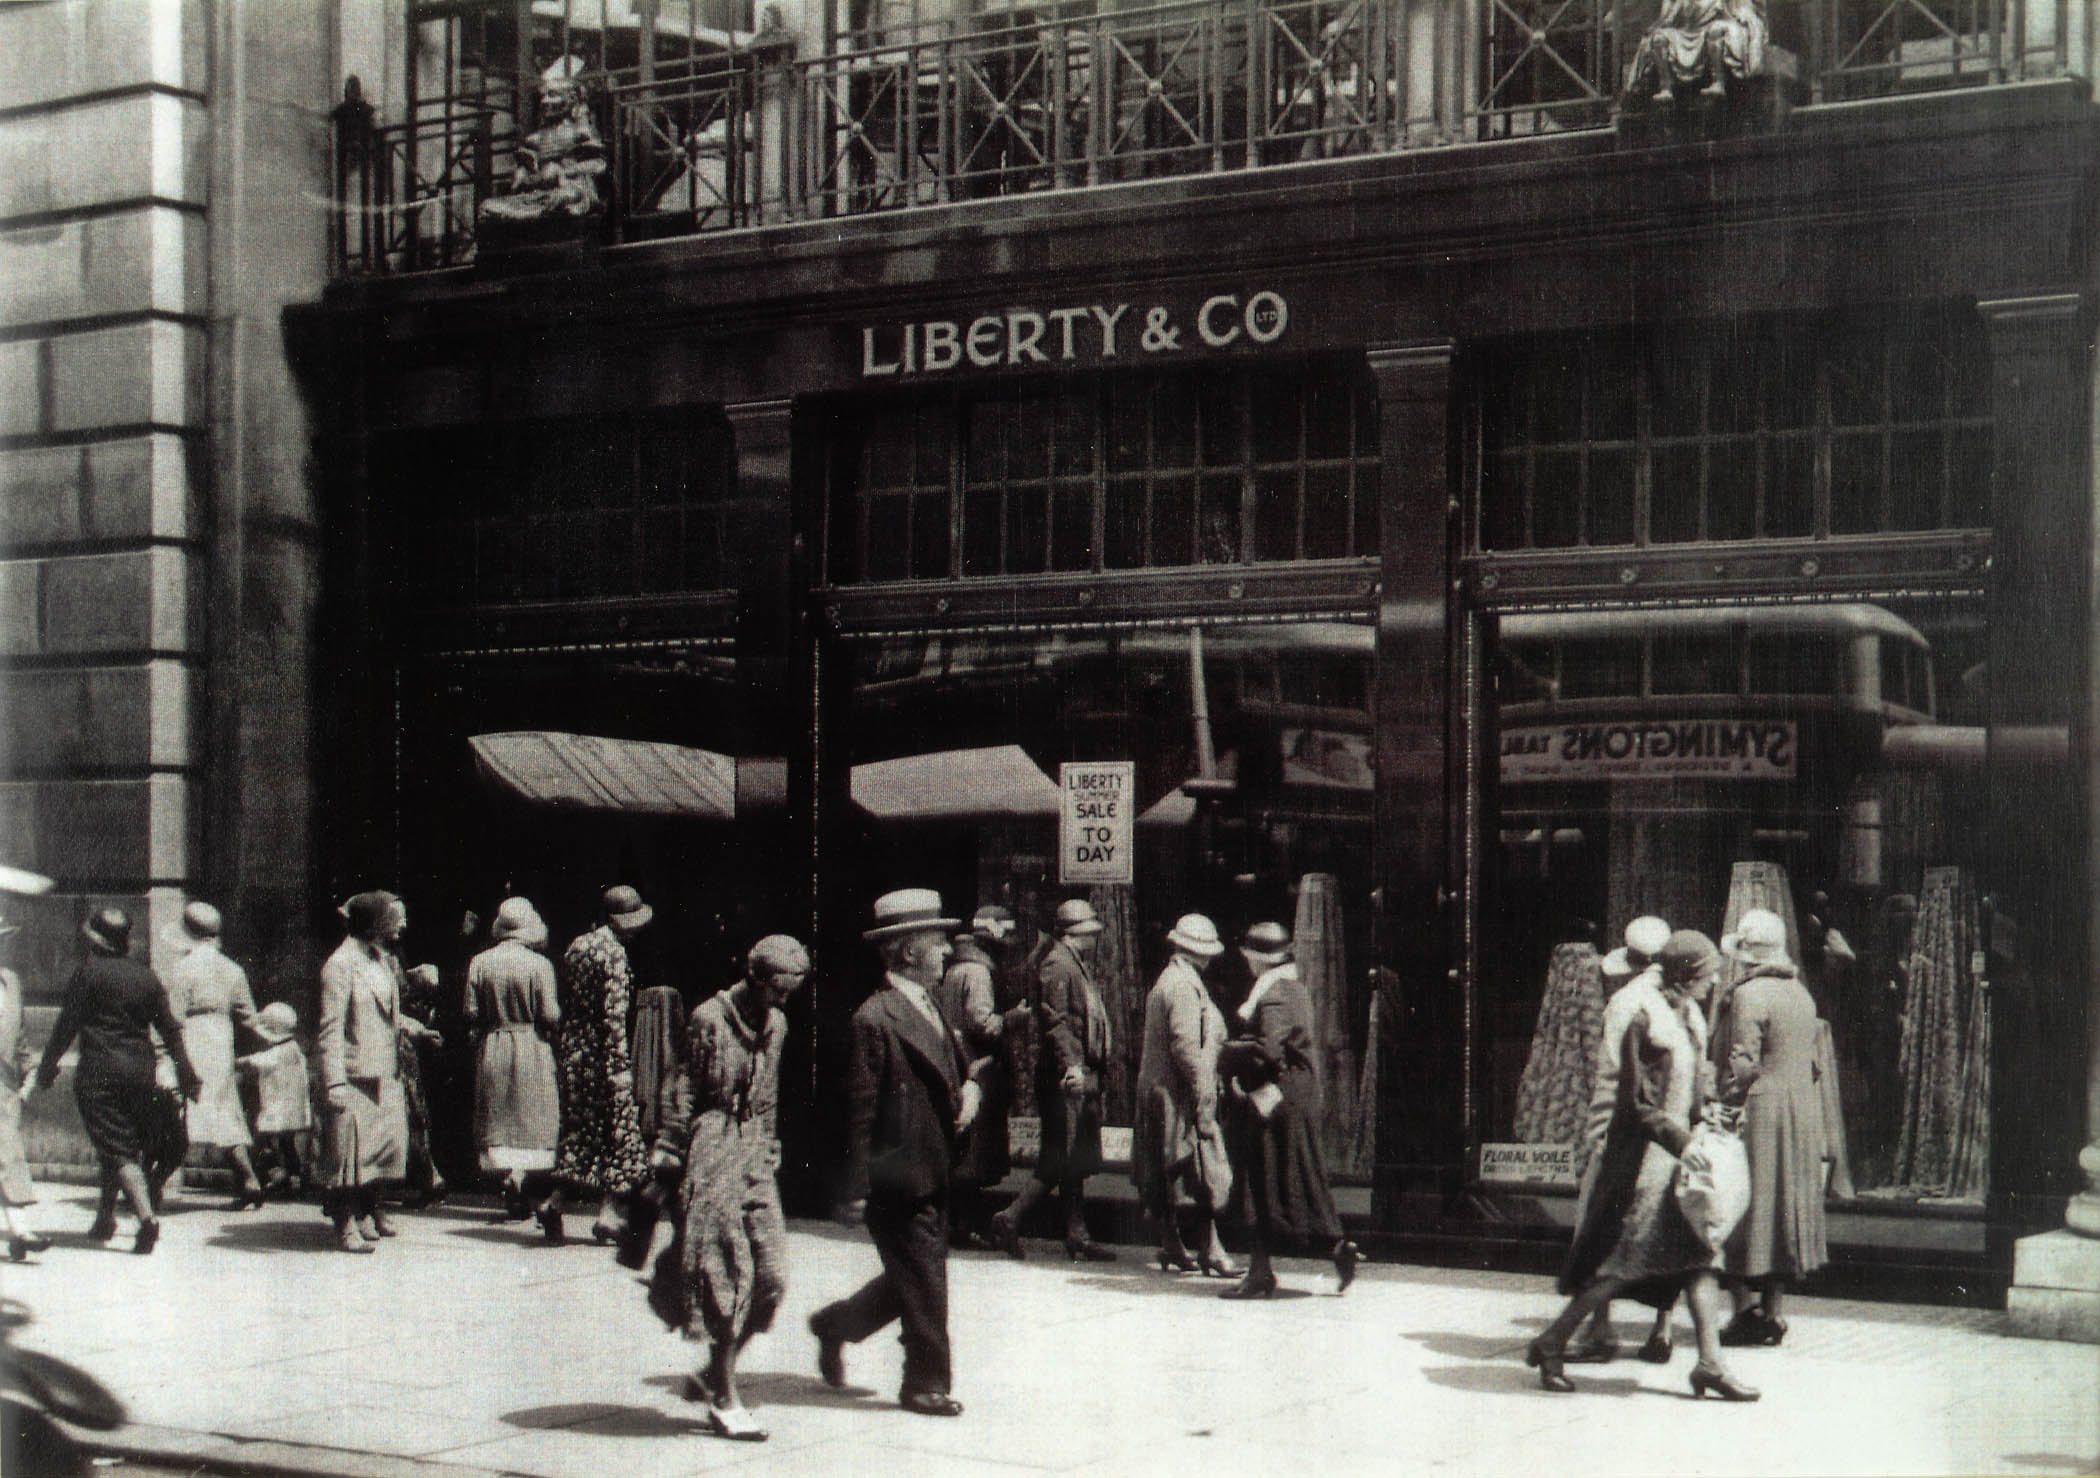 The Liberty of London department store in 1925